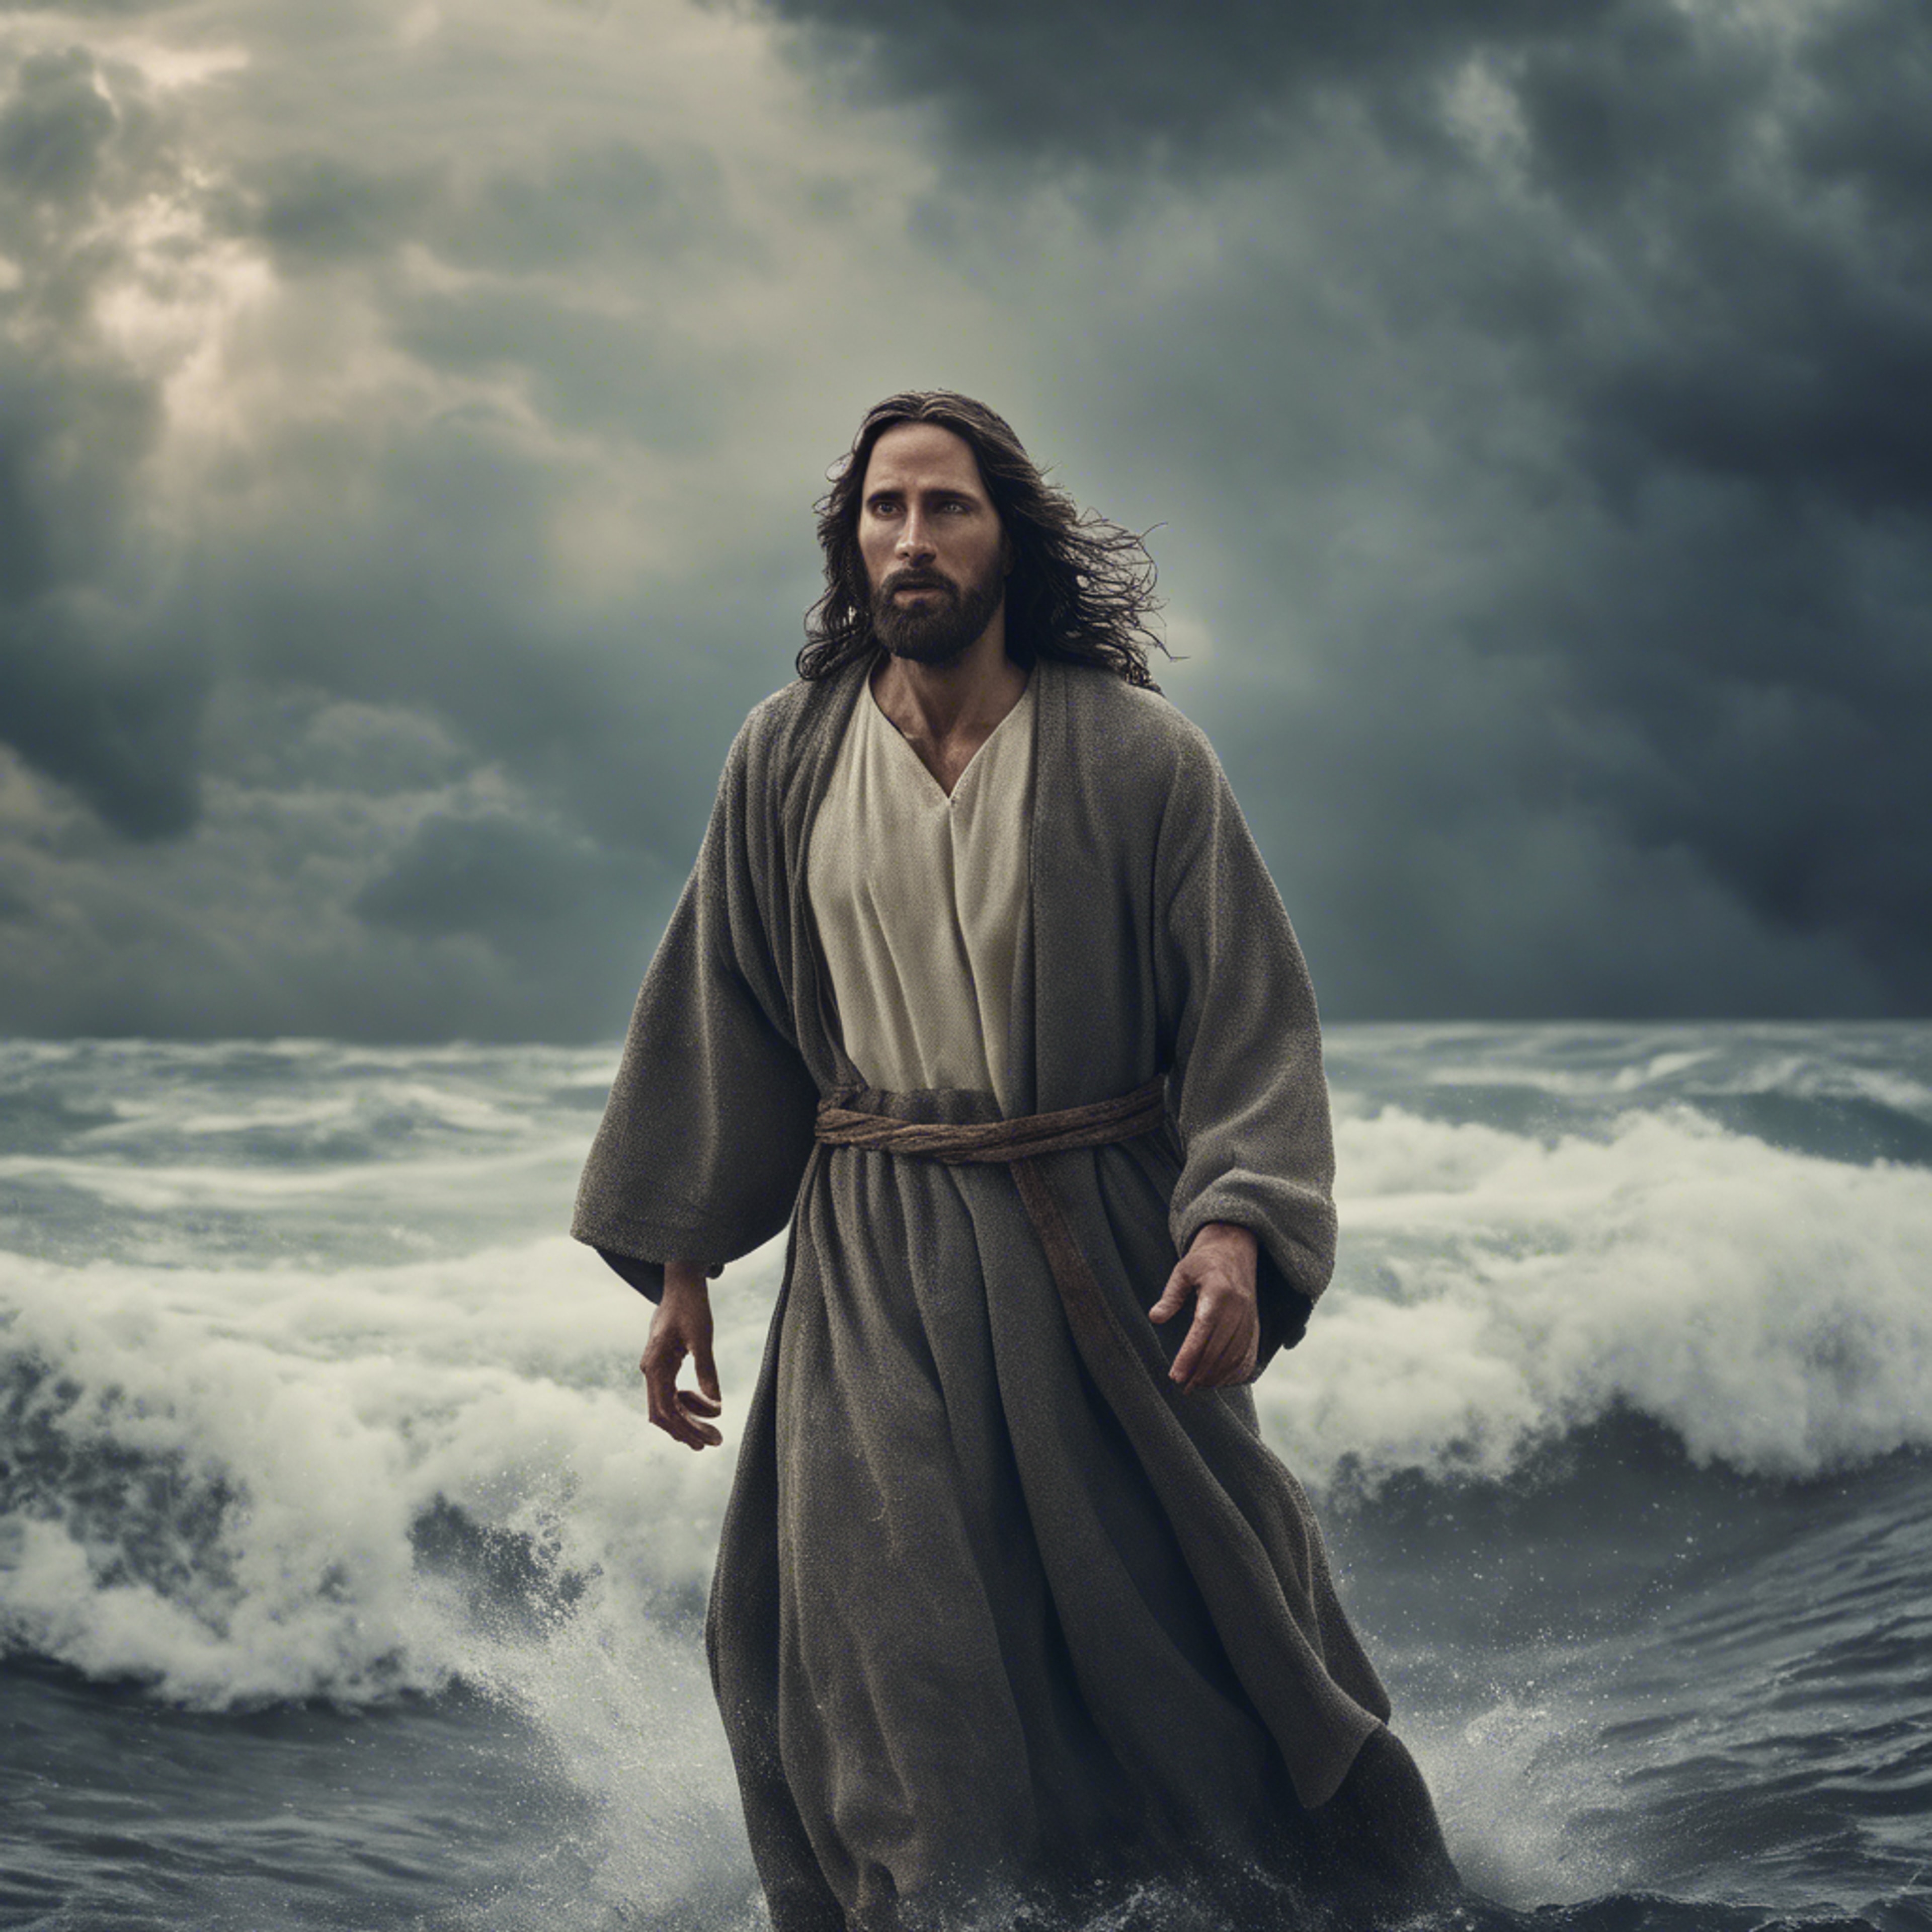 Jesus Christ calmly walking across a stormy sea under a dramatic, cloudy sky.壁紙[40d9c306725247569090]